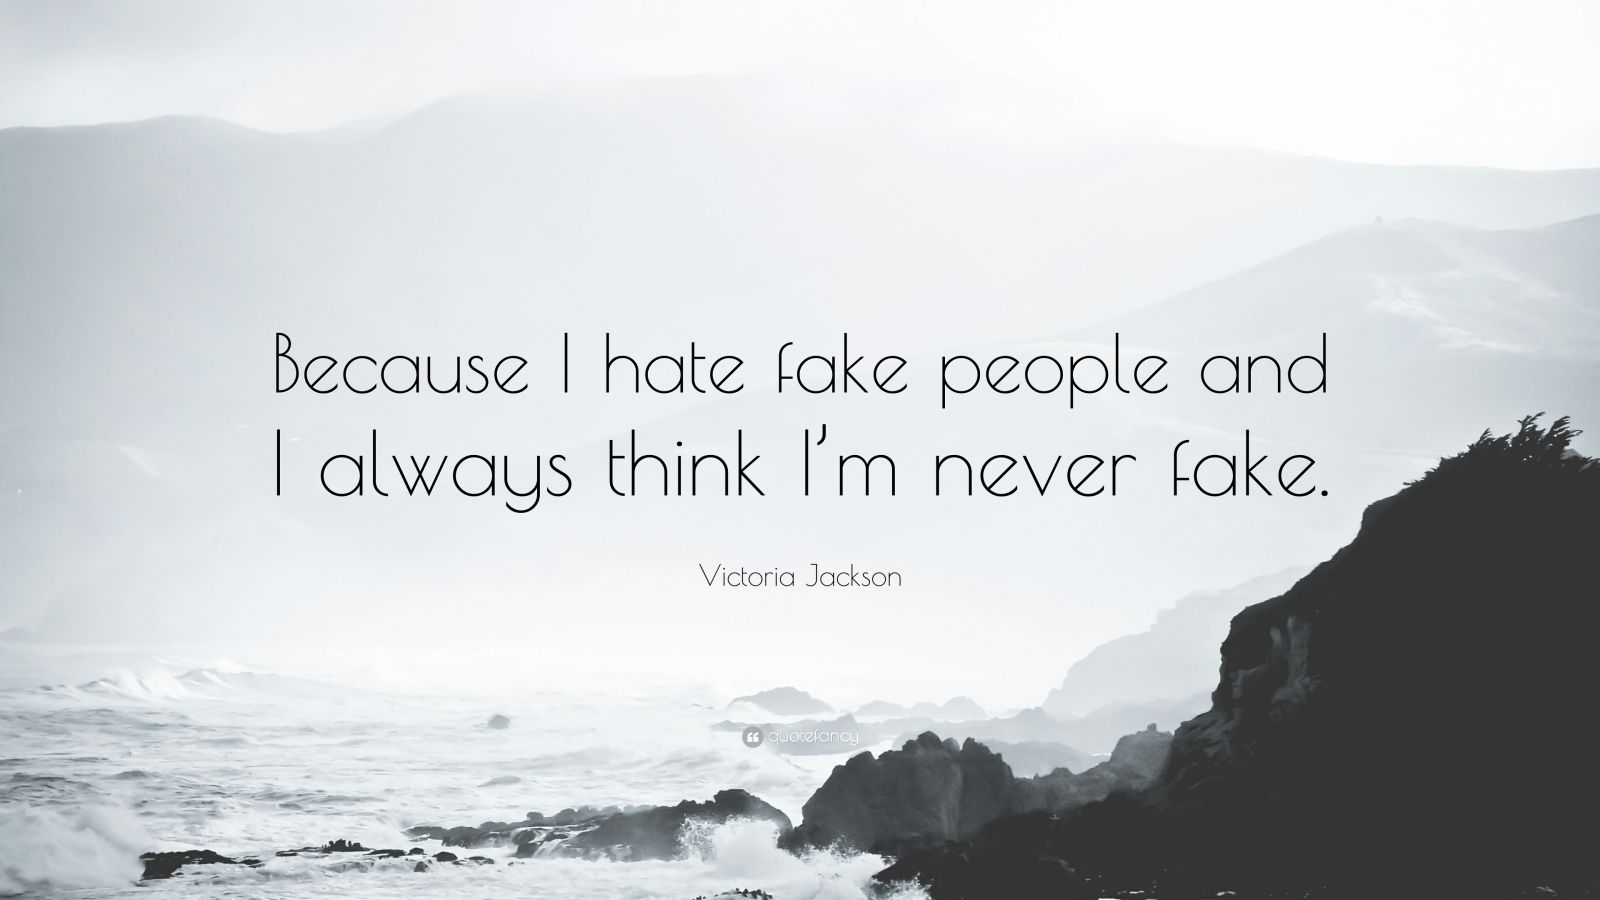 Victoria Jackson Quote: “Because I hate fake people and I always ...